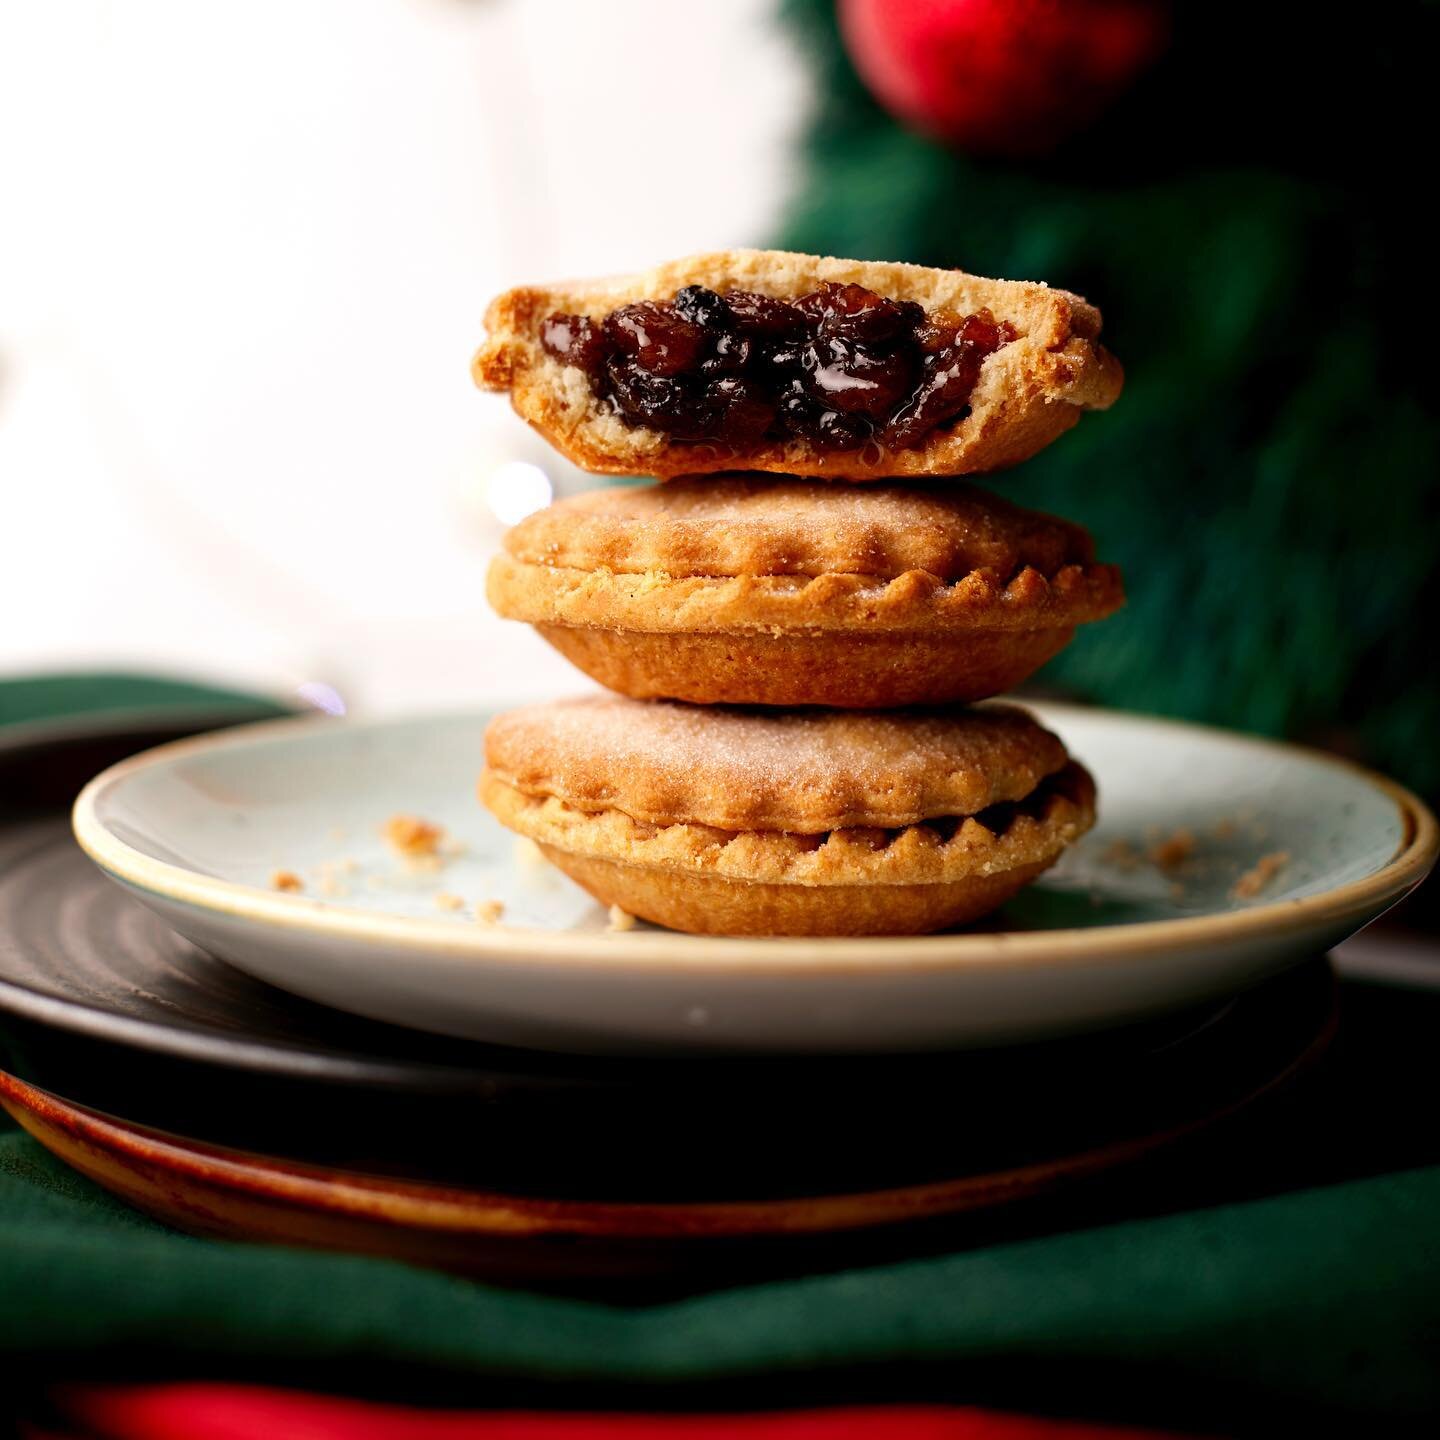 Delicious Baked Christmas Goodies only from @wenzelsthebakers Styled by @loicparisot shot with @feedforthetree 
.
.
.
.
.
.
#christmas #festive #indulgence #treatyourself #baking #handmade #mincepies #sandwiches #vegitarian #holiday #photography #bak